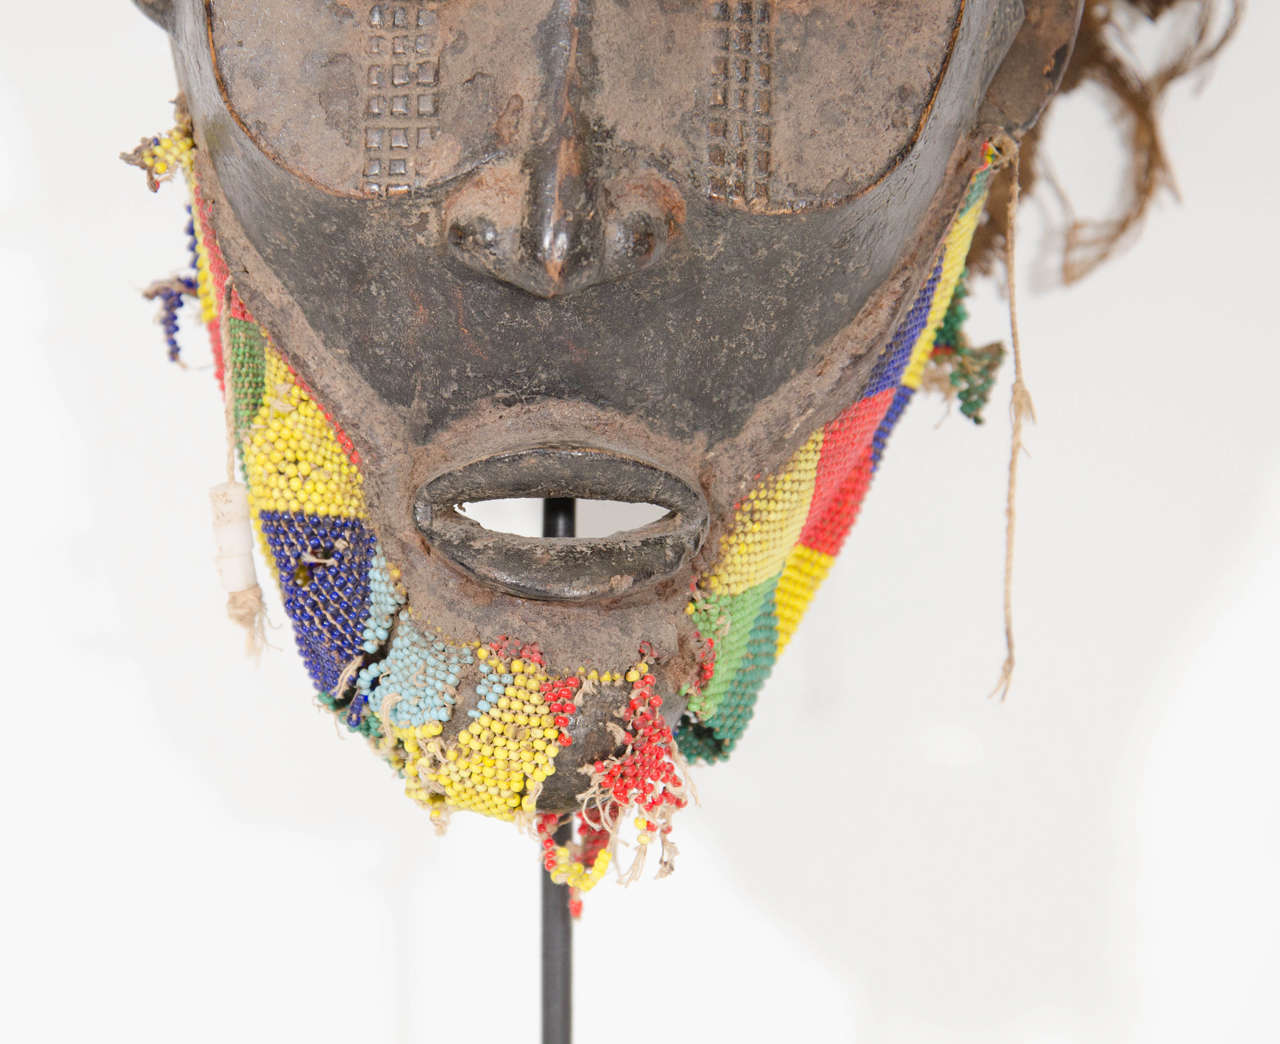 Fabric Beaded Wooden Mask in the Style of Chokwe Tribal Ritual